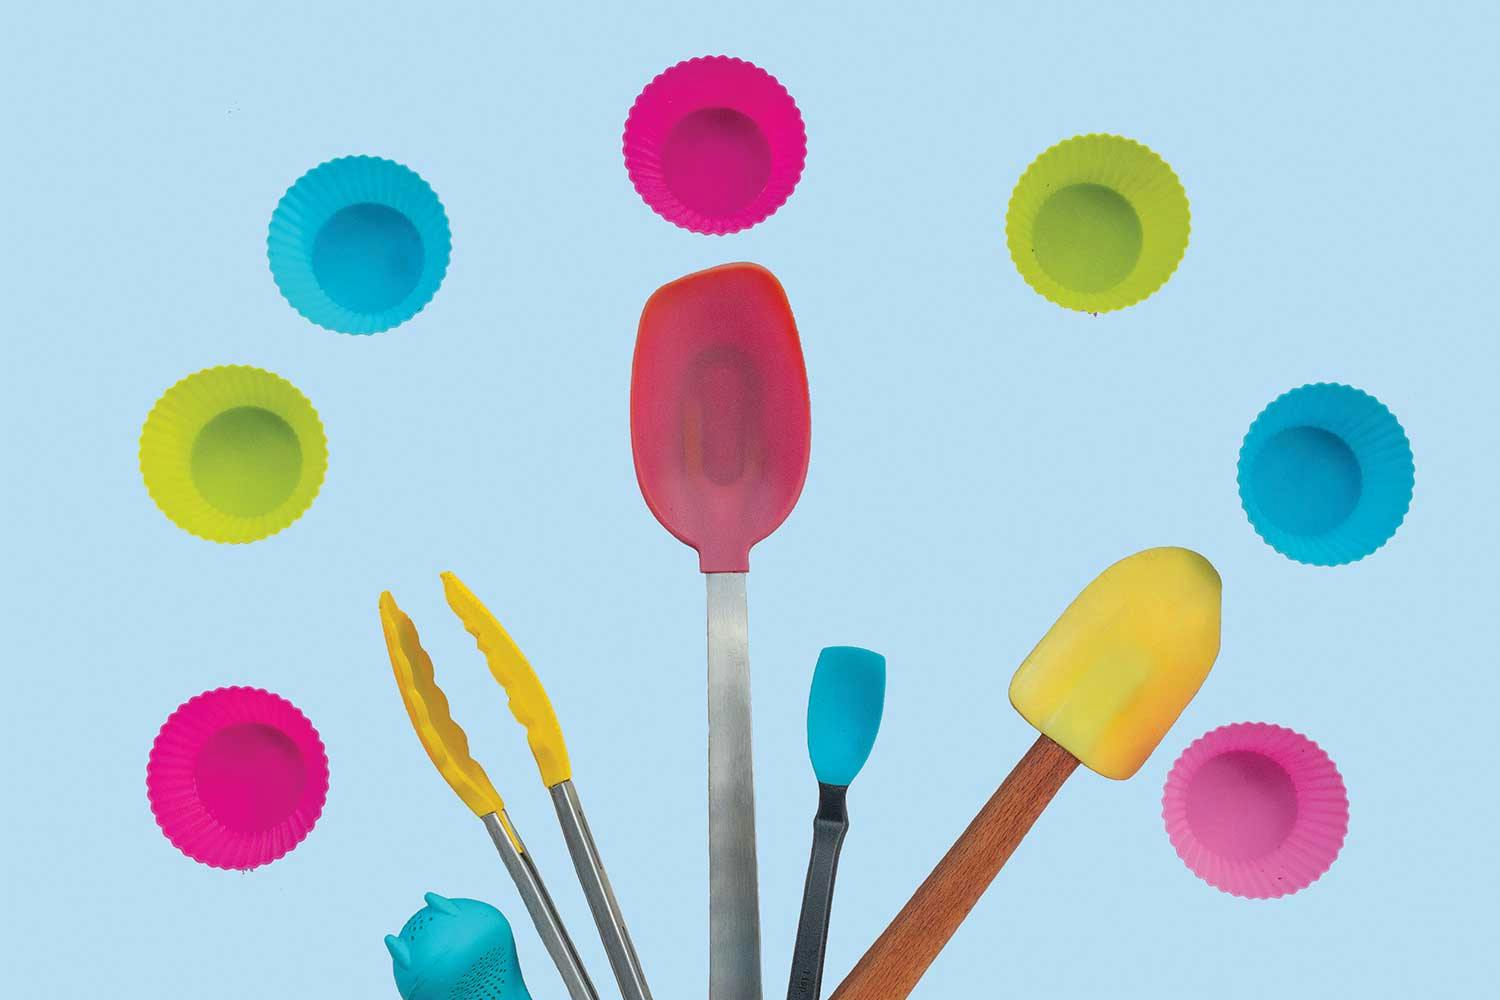 Silicone kitchen tools arranged in a fan shape sit on a blue background, with silicone cupcake liners scattered above them.